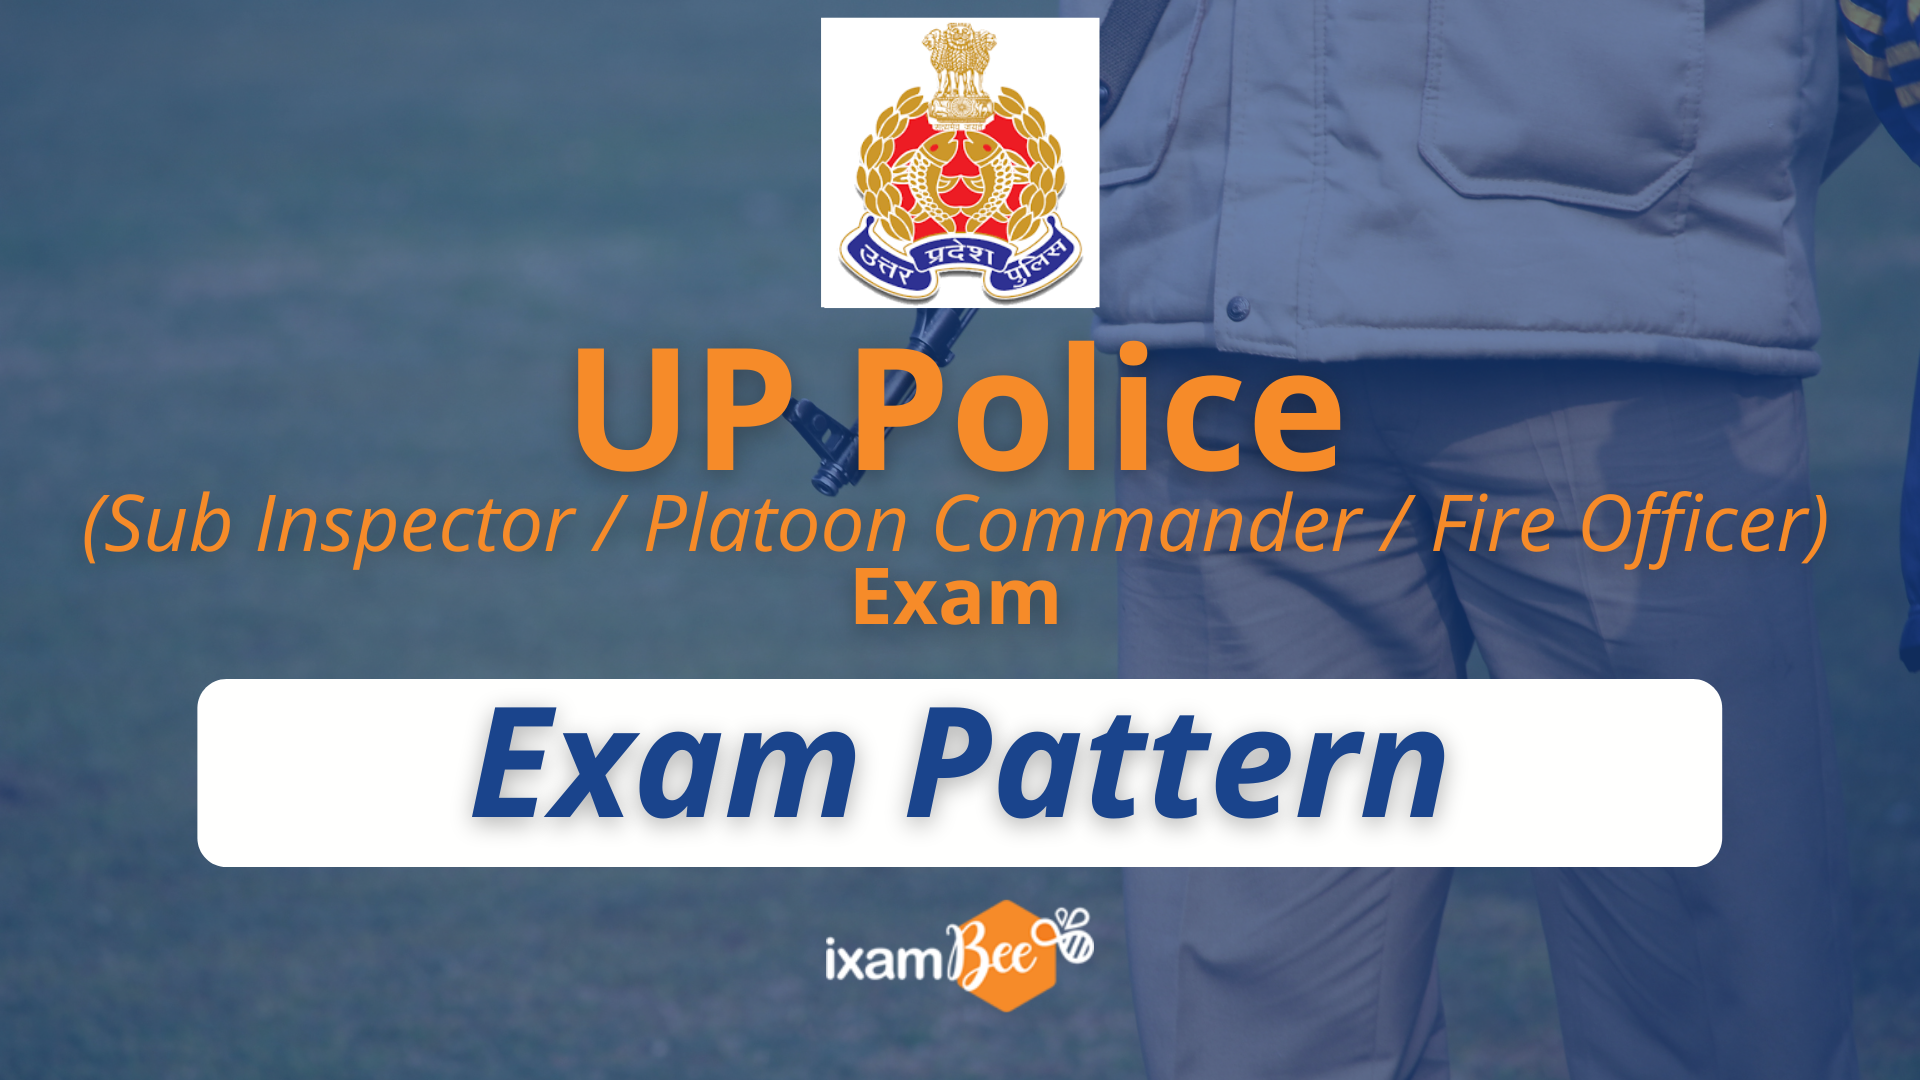 UP Police (Sub Inspector, Platoon Commander, and Fire Officer) Exam Pattern